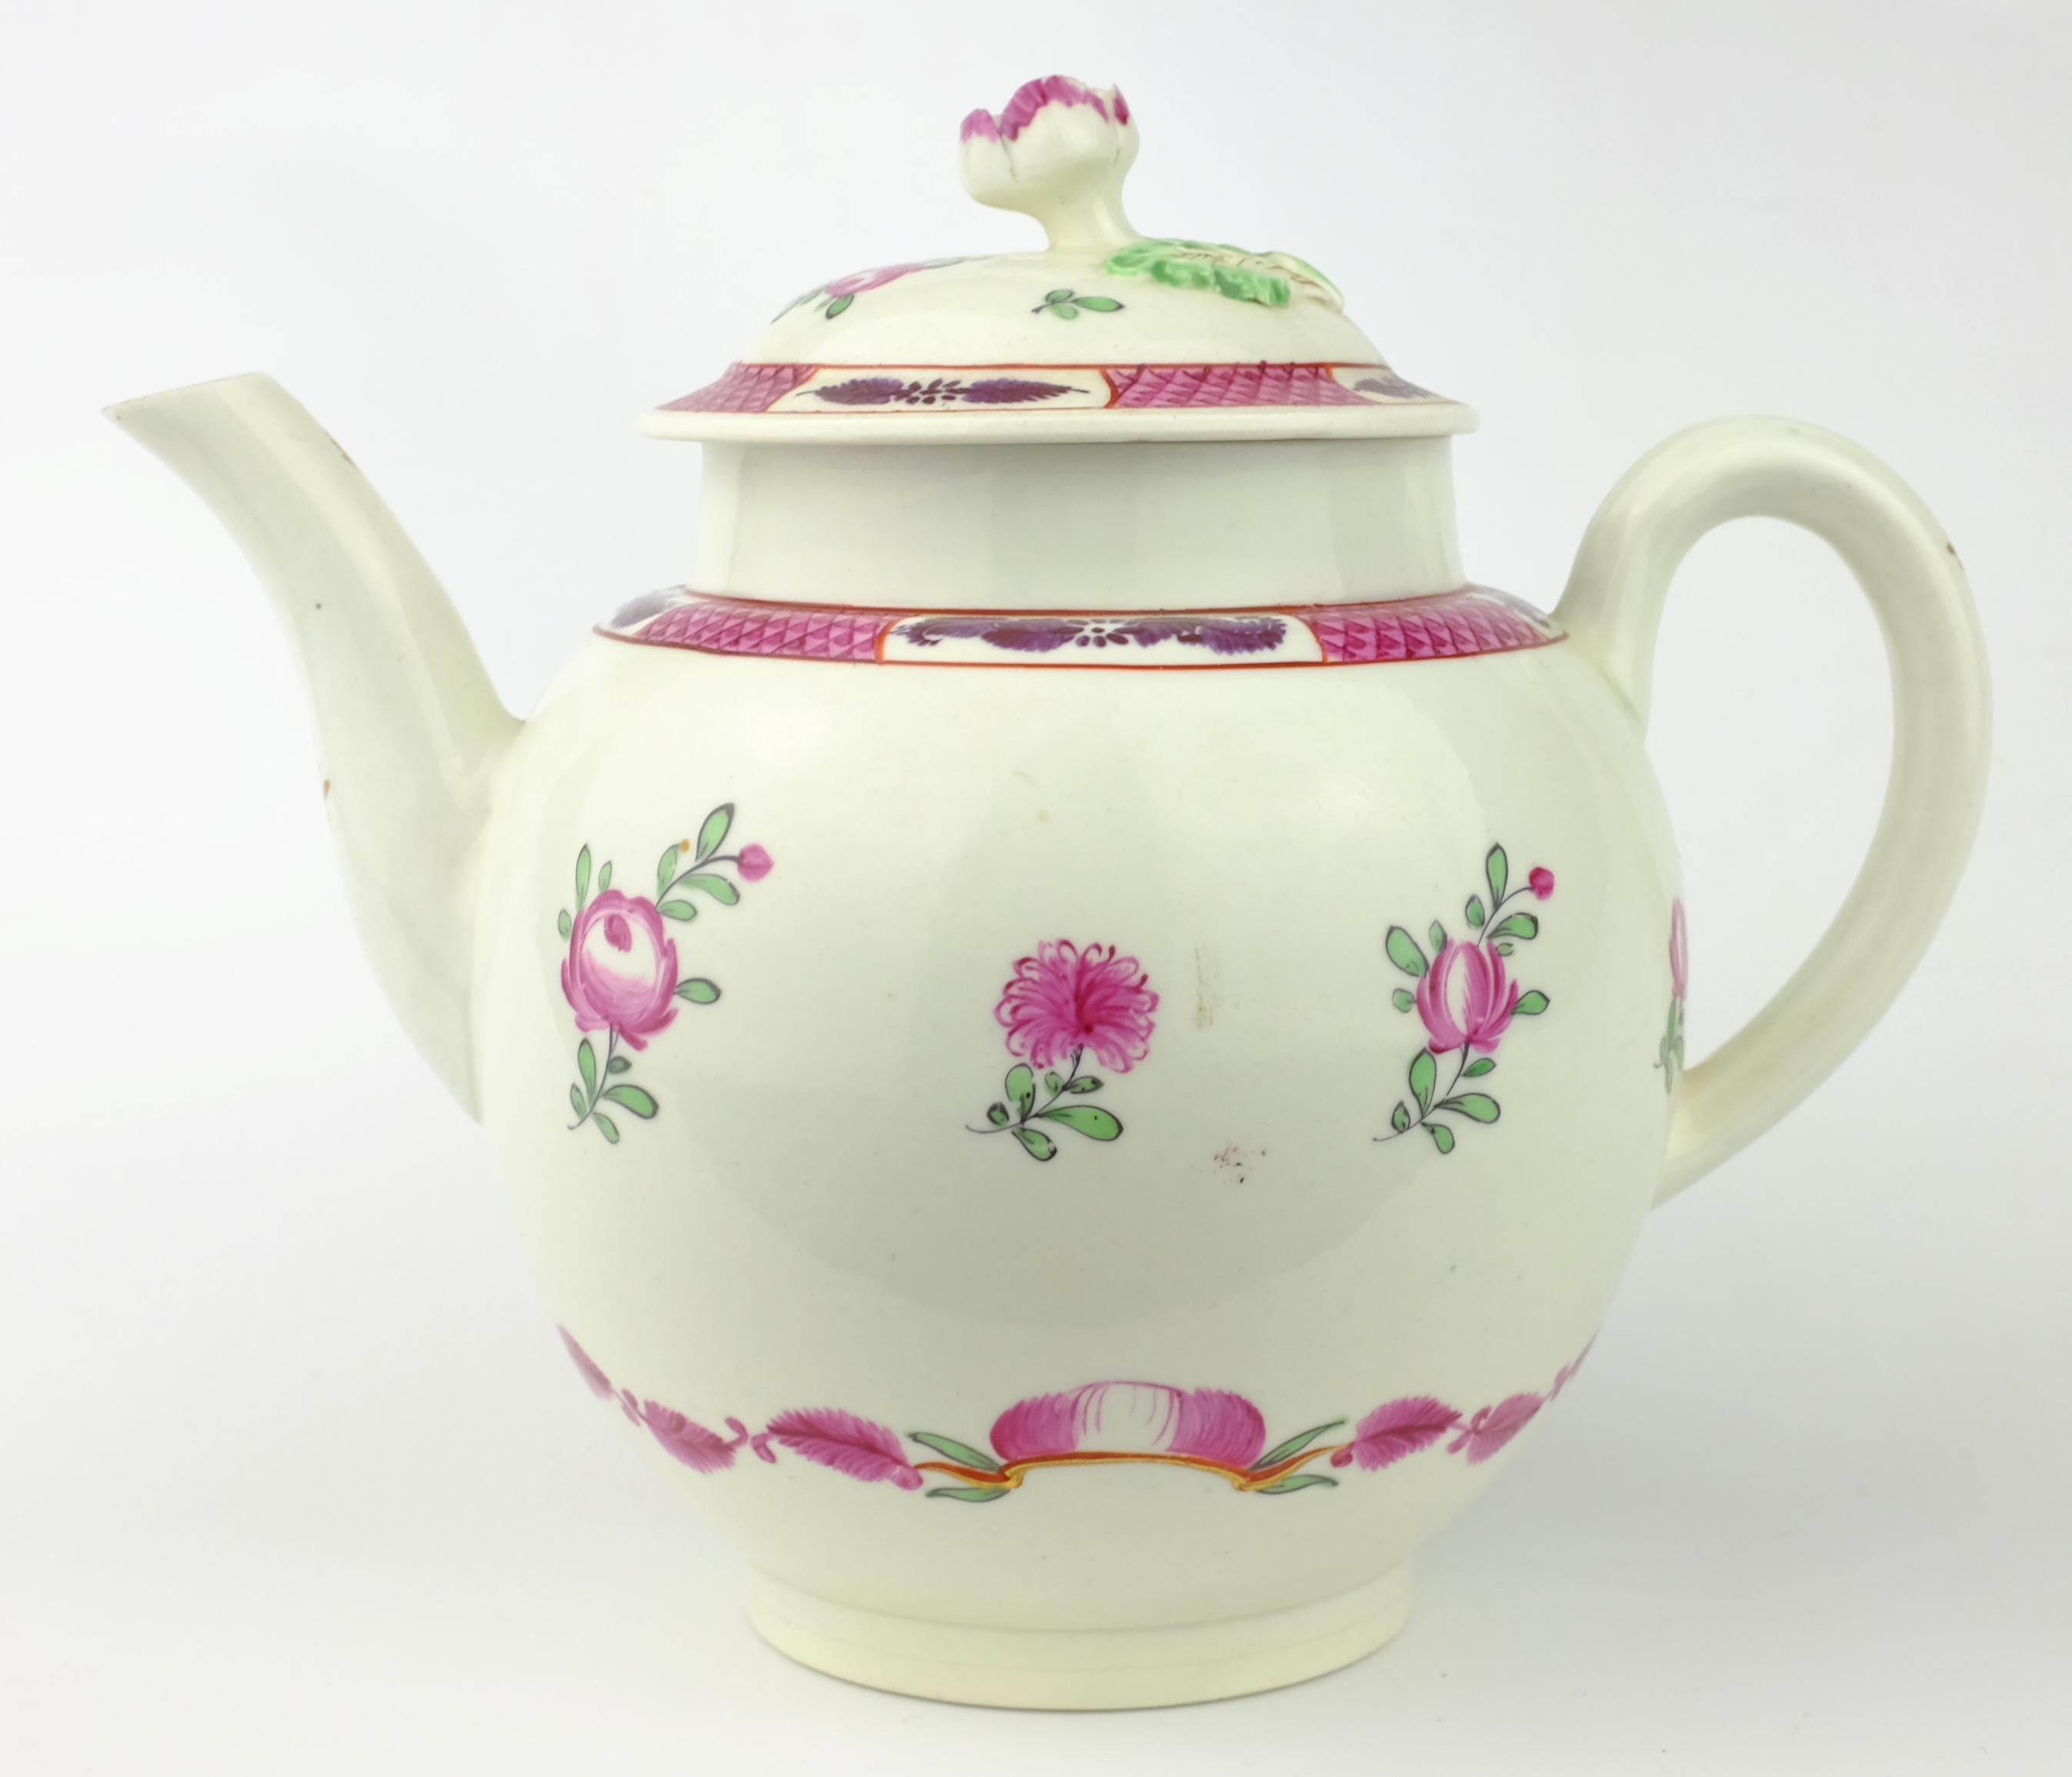 Late 18th century globular teapot, painted with floral sprays below a fish scale border, - Image 4 of 8